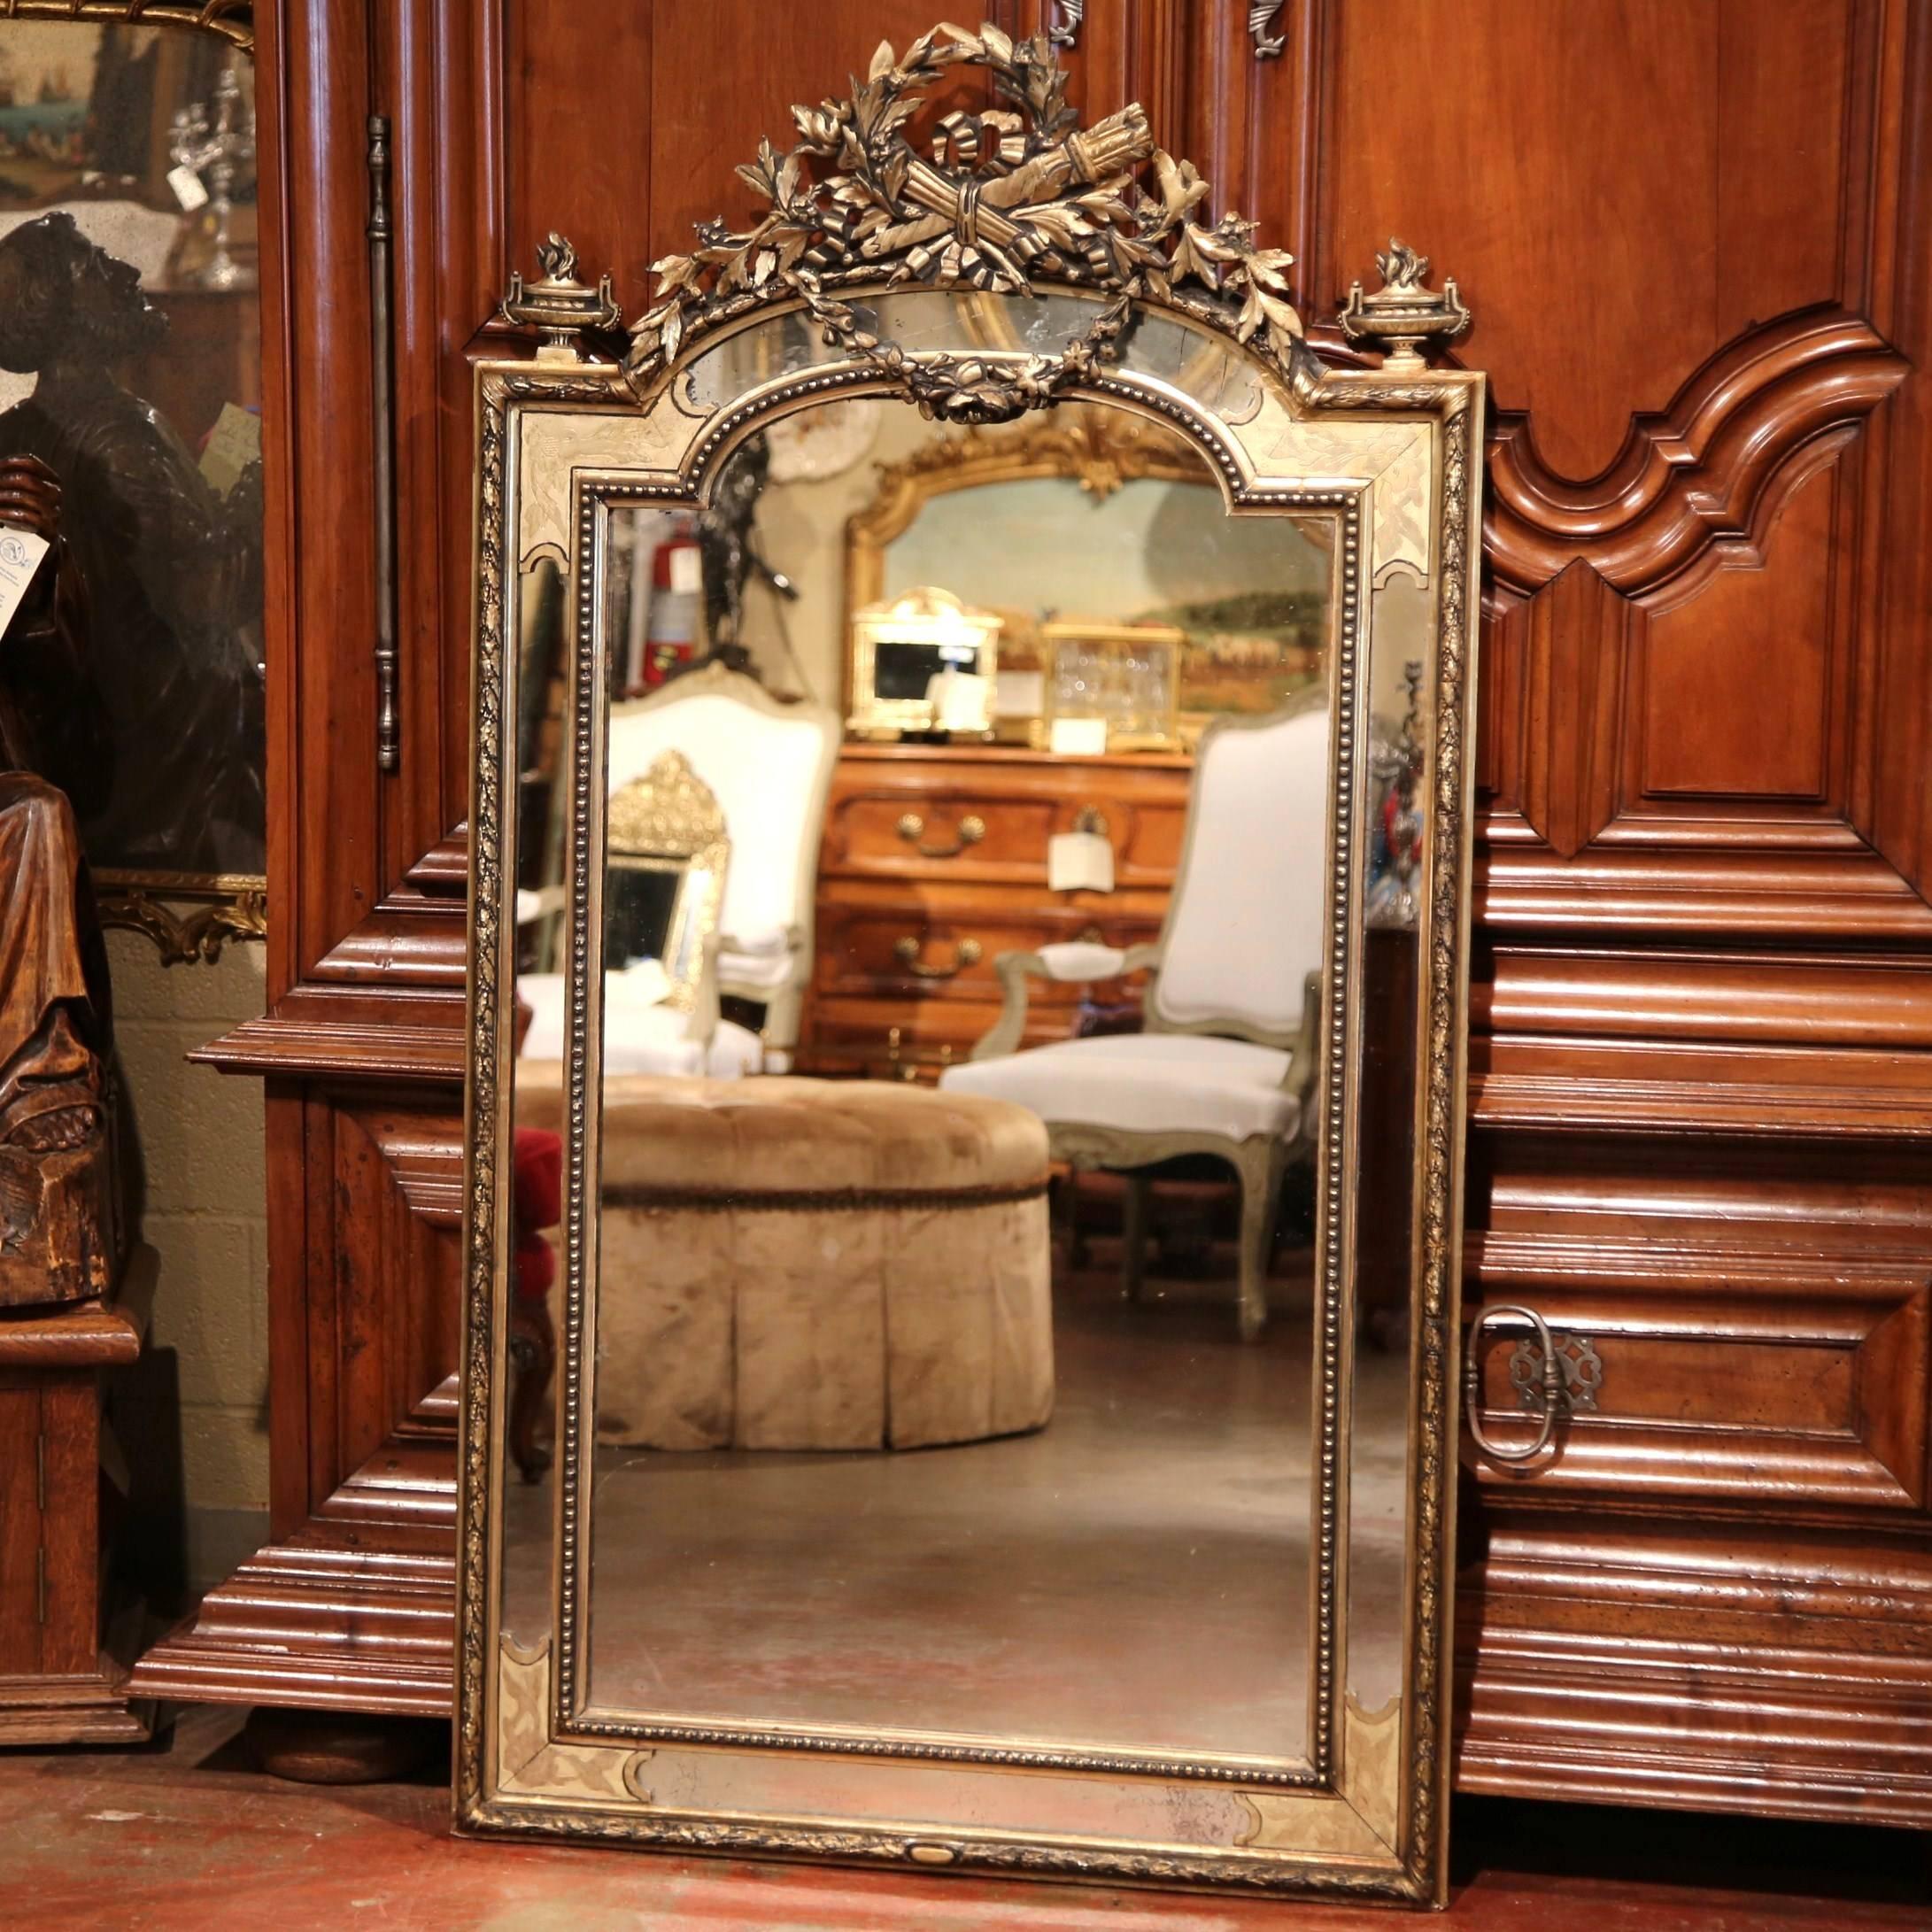 This elegant, antique wall mirror was crafted in Paris, France, circa 1870. The intricate, carved pediment features a Classic, iconographic motif, with two crossed torches and the traditional Louis XVI ribbon bow inside a laurel wreath, embellished